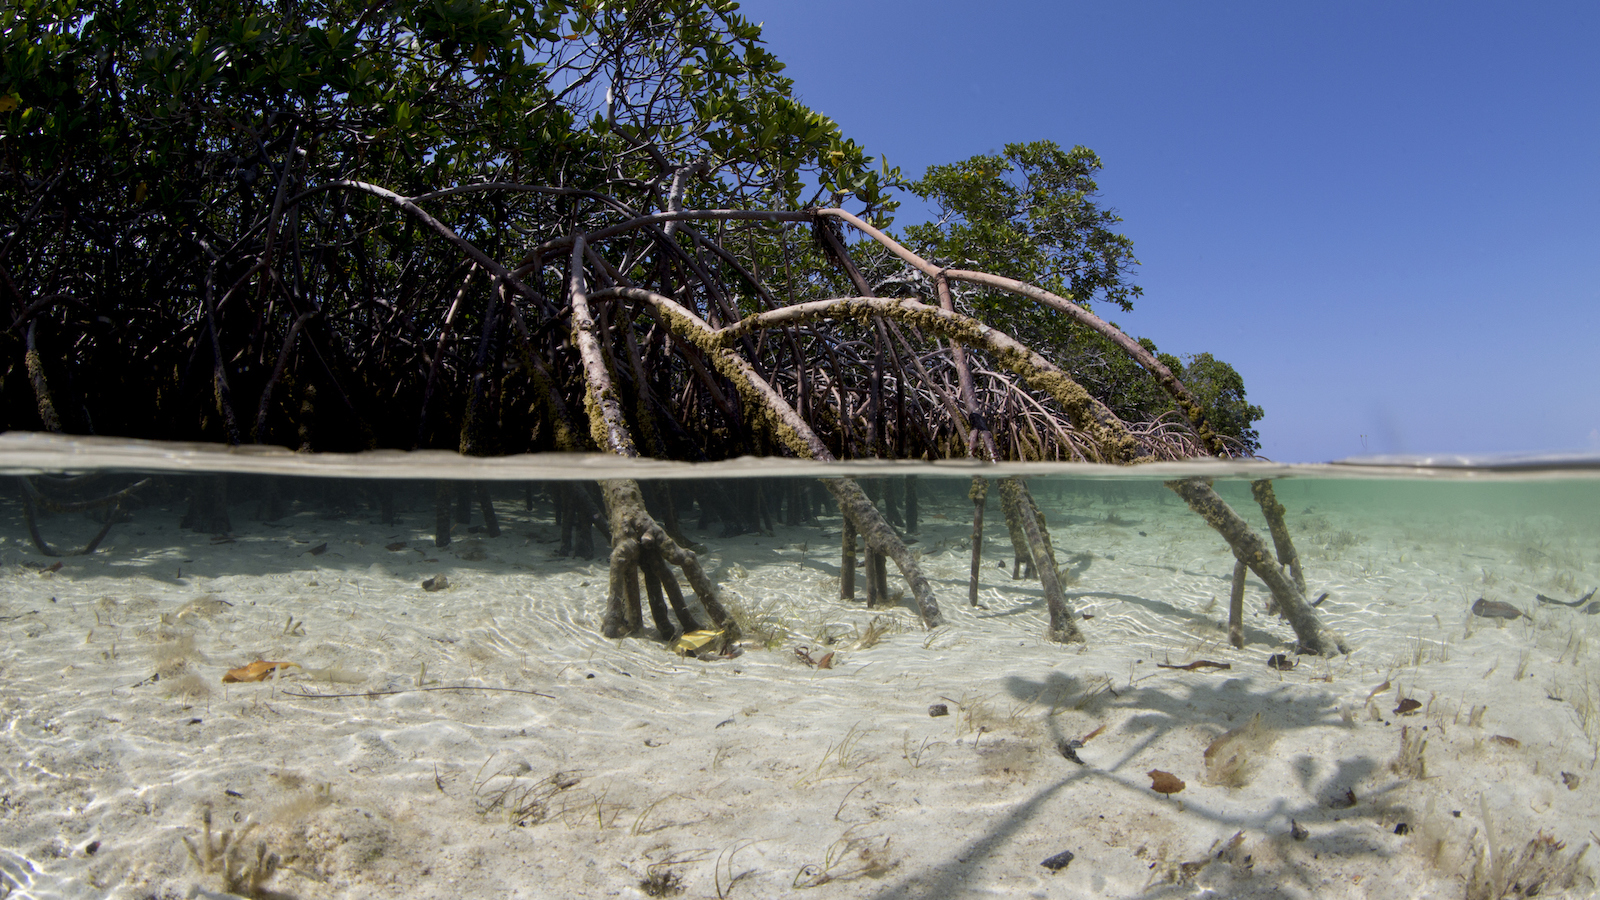 Mangrove roots grow out of white sand in the shallow waters off the Bahamas.